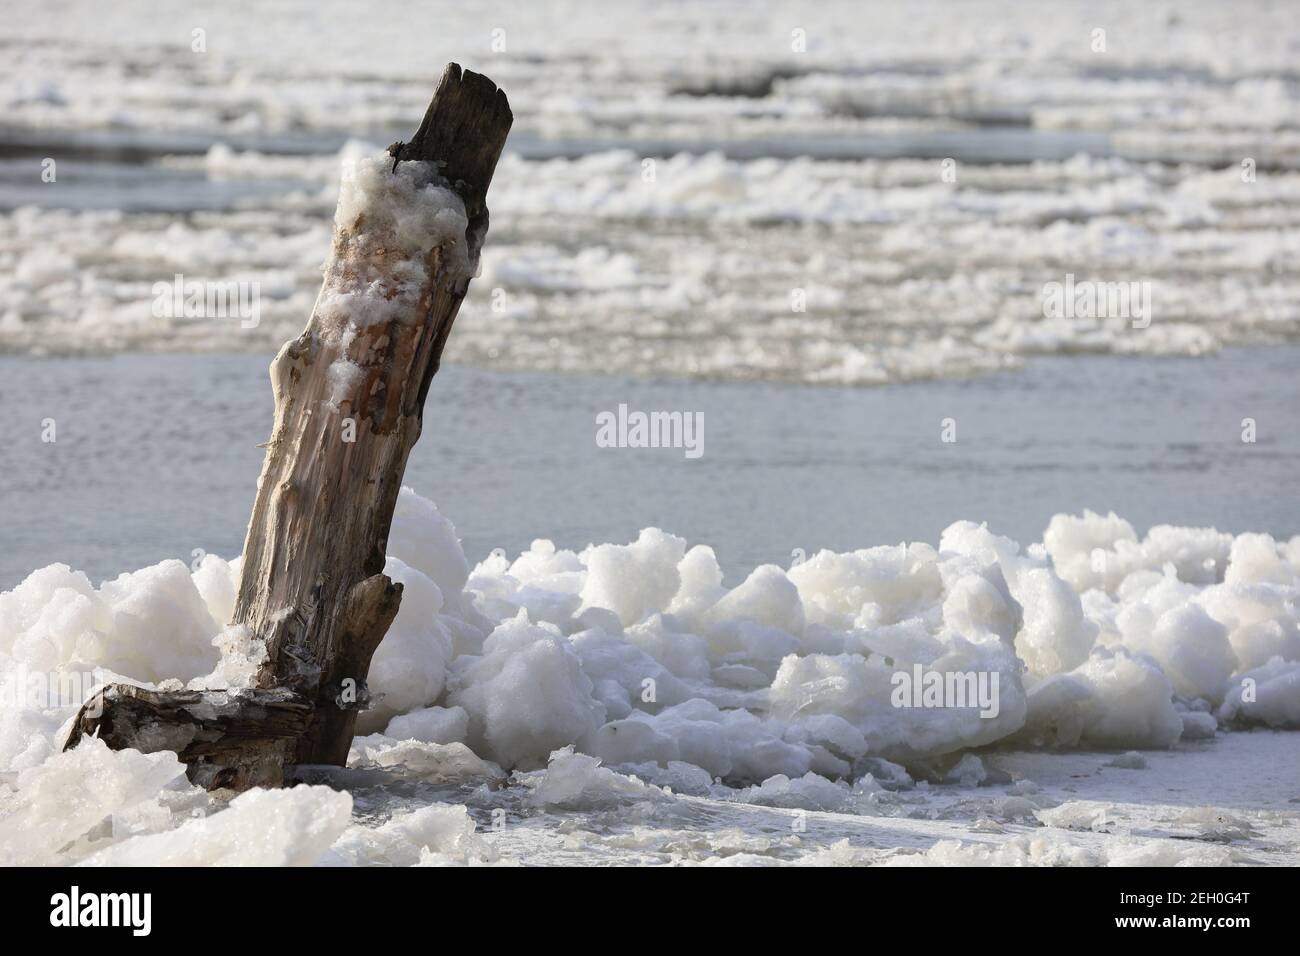 The river hung in winter, thaw by the river, trees by the shore, tree stump in the ice, snow and floe on the river Stock Photo